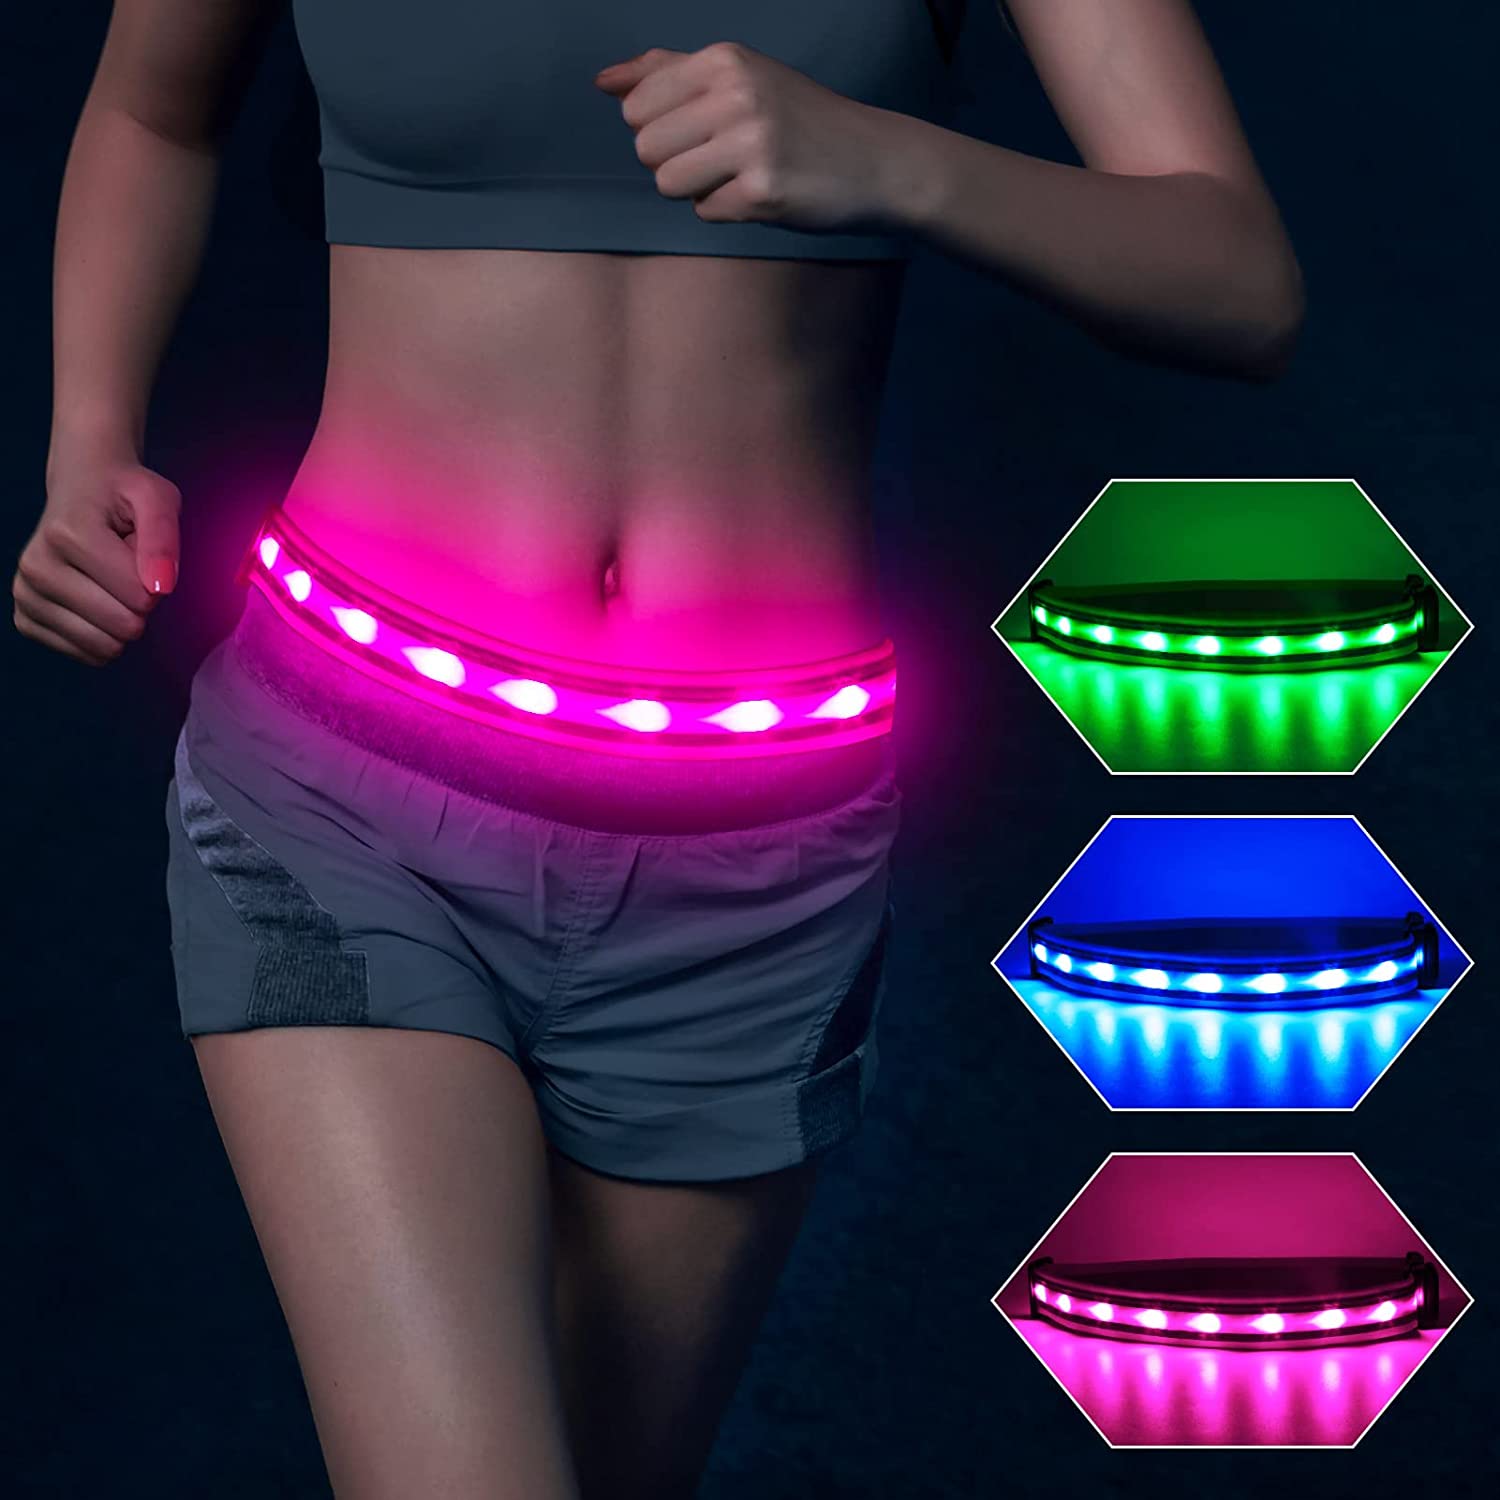 Buy LED Light Up Running Belt Reflective Waist Belt USB Rechargeable Safety  Lights Fully Adjustable Elastic Glowing Band & High Visibility Gear for  Running Walking Cycling, Fits Women Men & Kids (Blue)